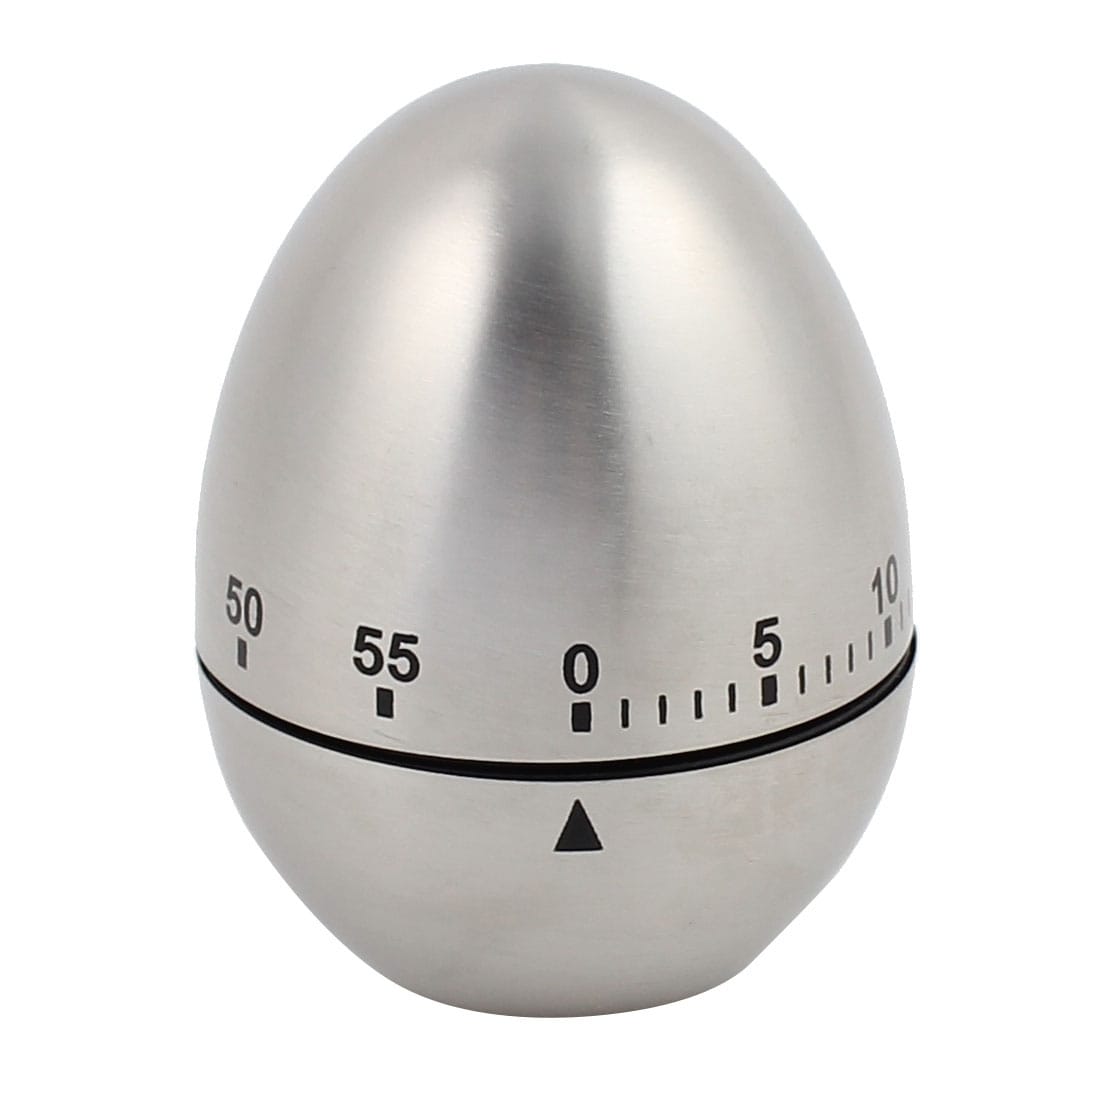 2.4x2.4x3.1-Inch 60 Minute Mechanical Kitchen Egg Timer Stainless